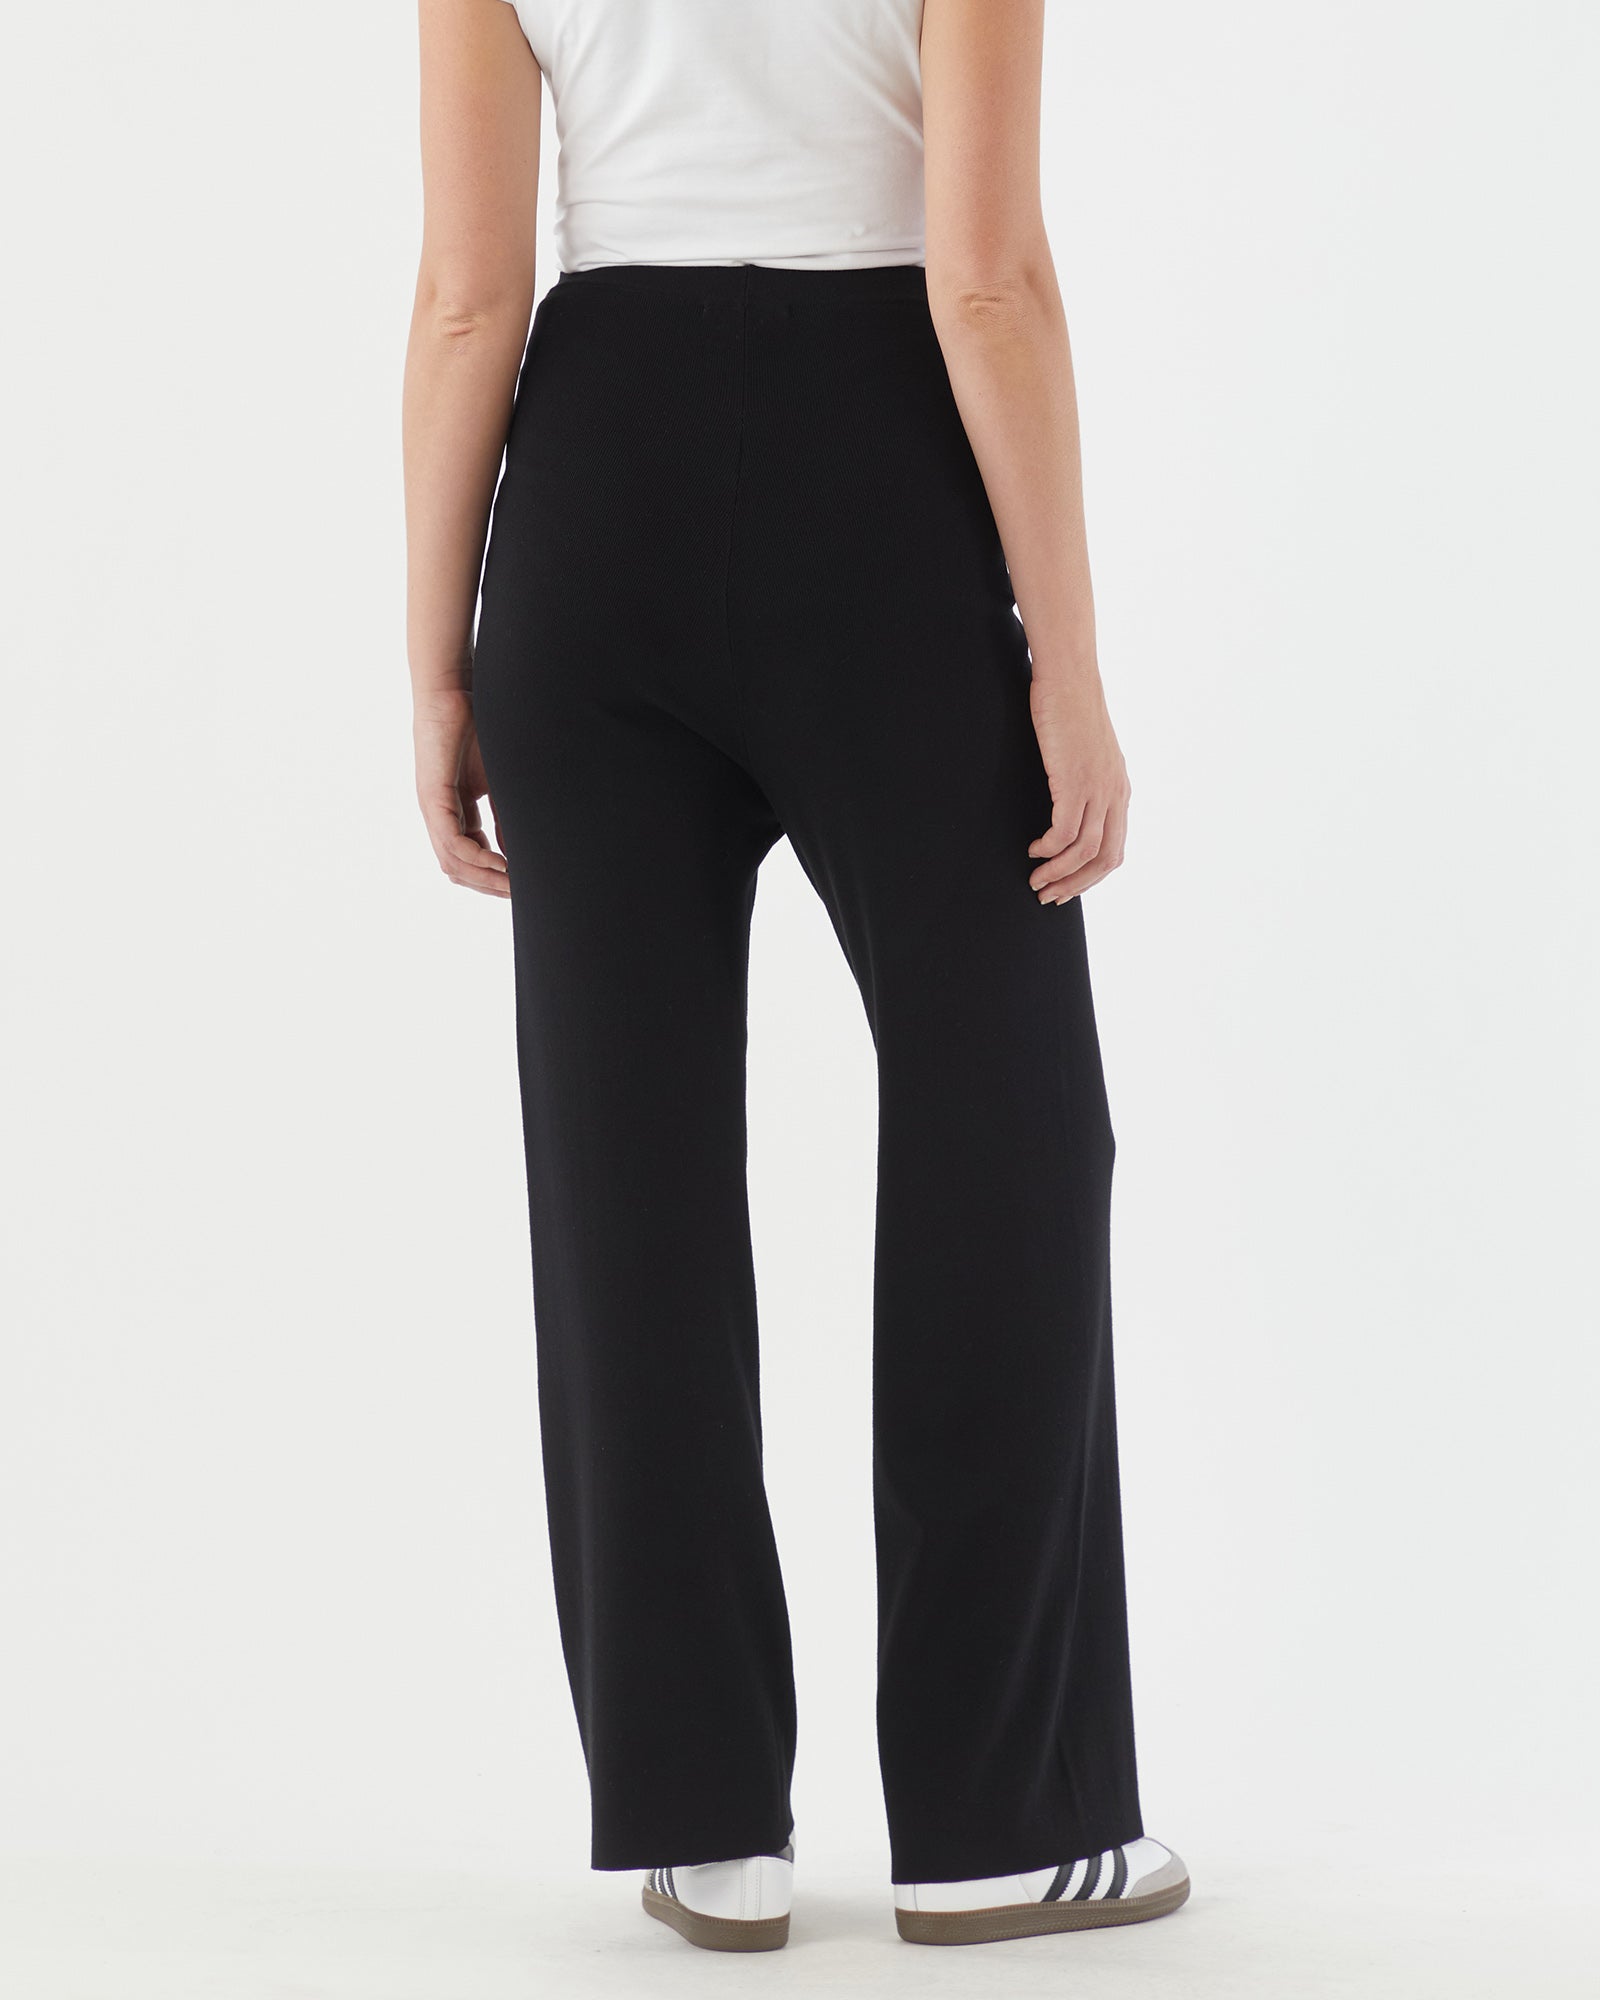 The Knit Straight Pants